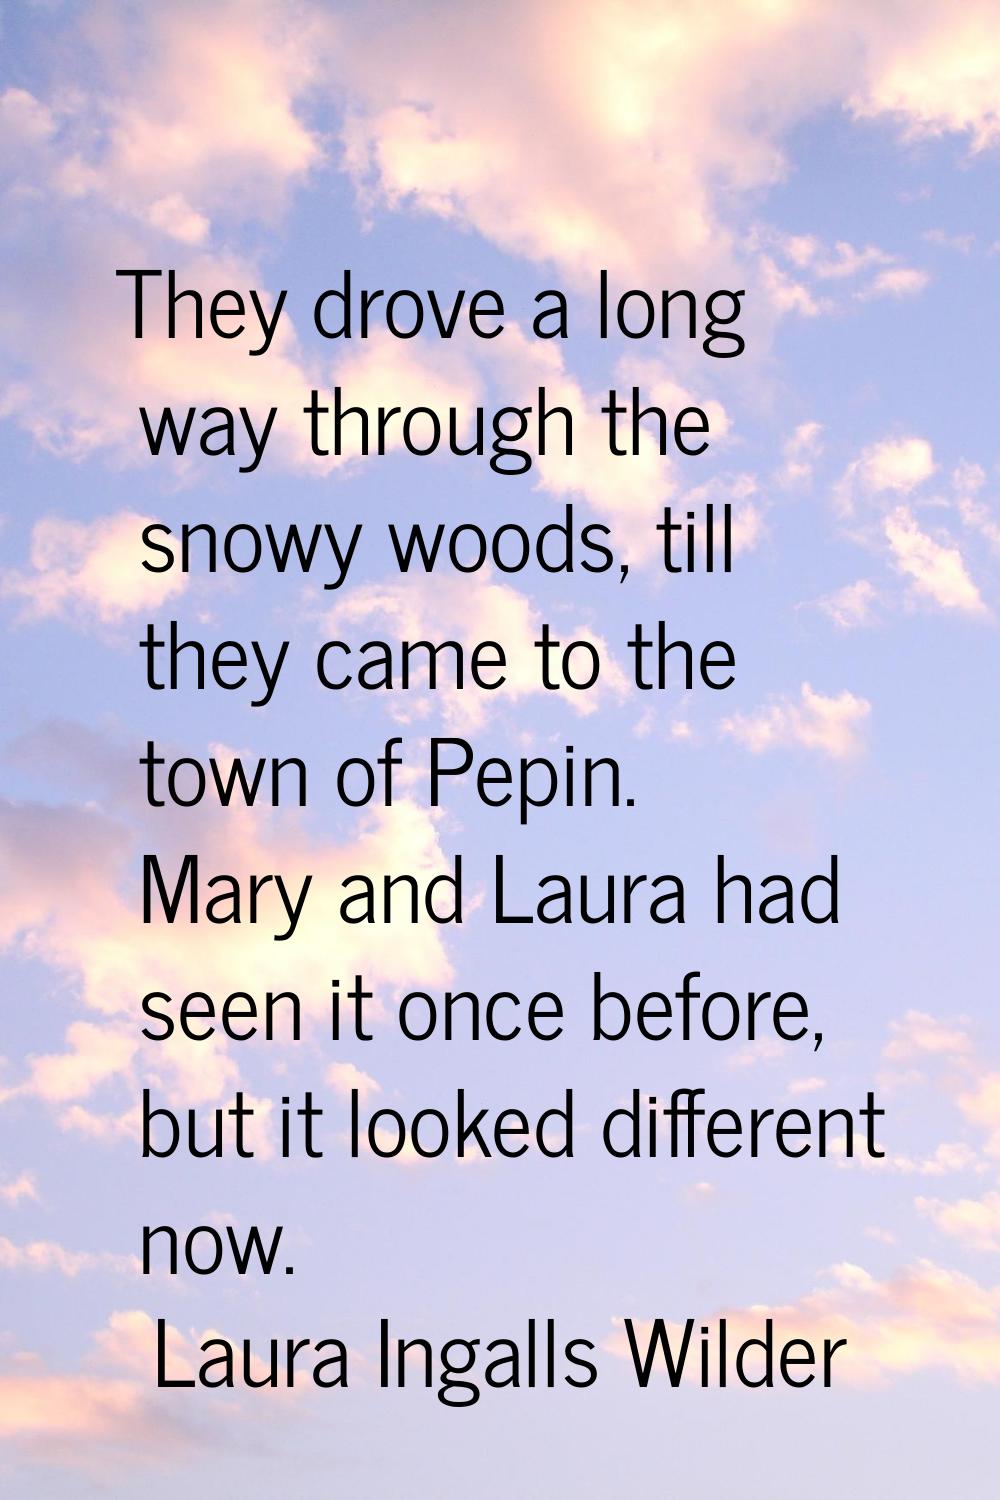 They drove a long way through the snowy woods, till they came to the town of Pepin. Mary and Laura 